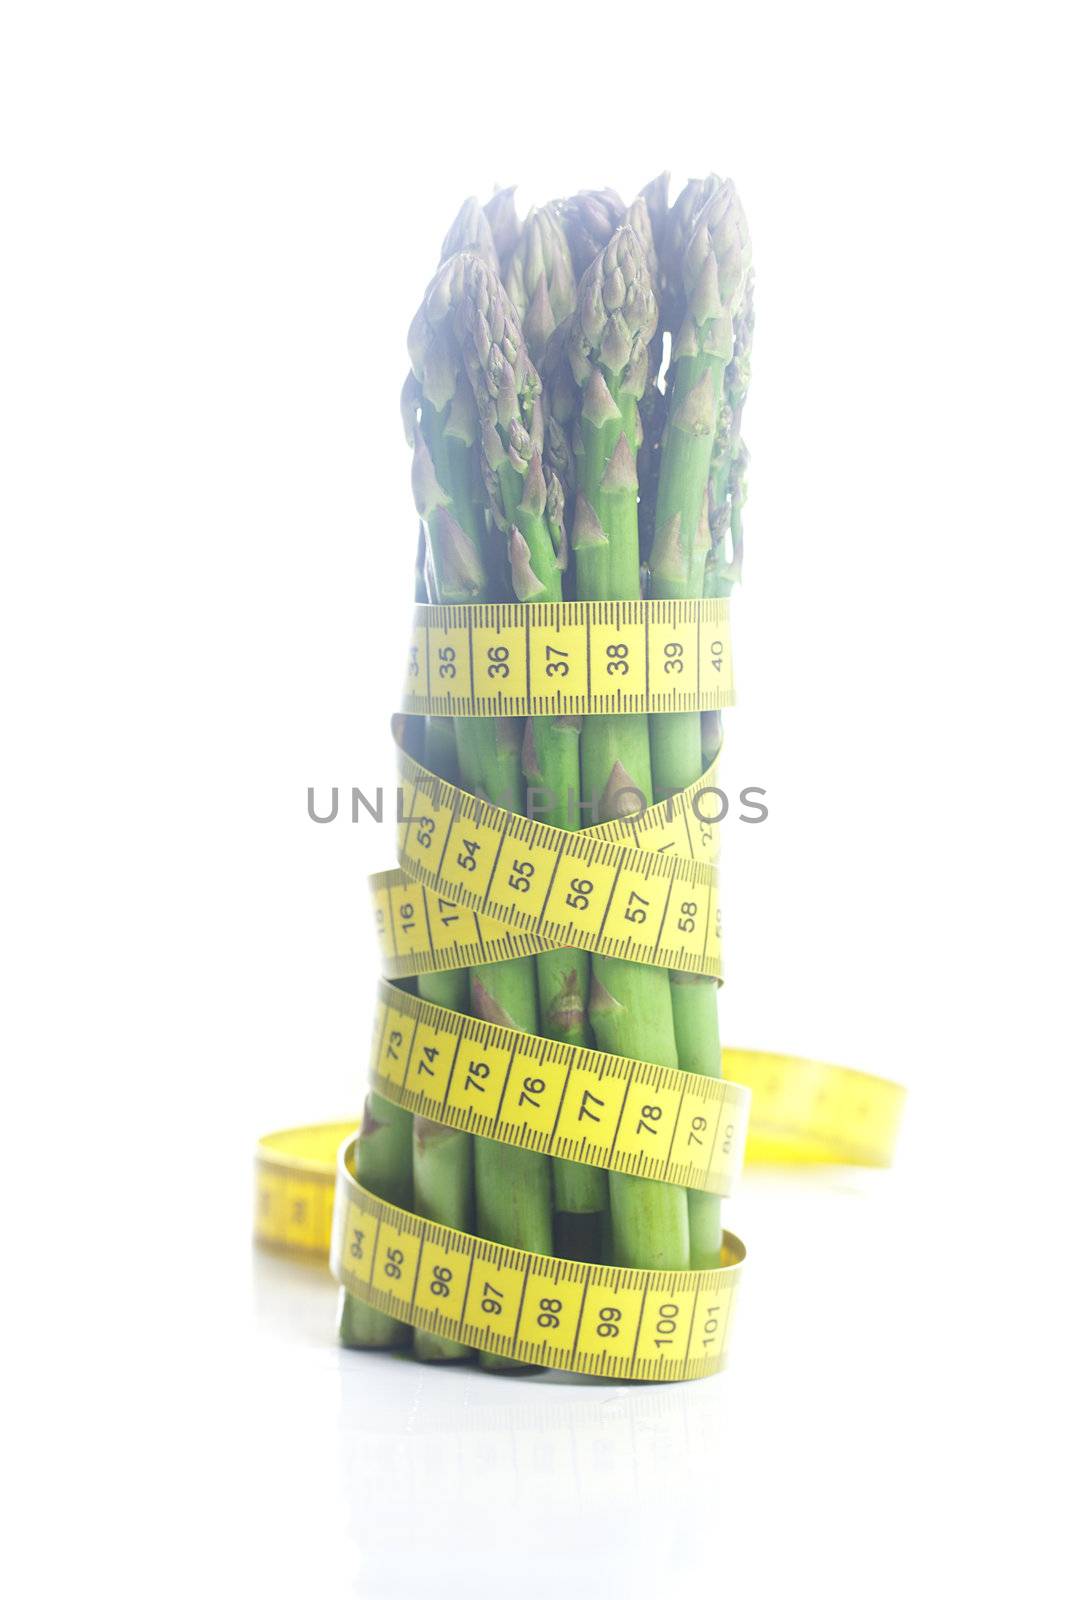 bunch of asparagus tied with measuring tape isolated on white